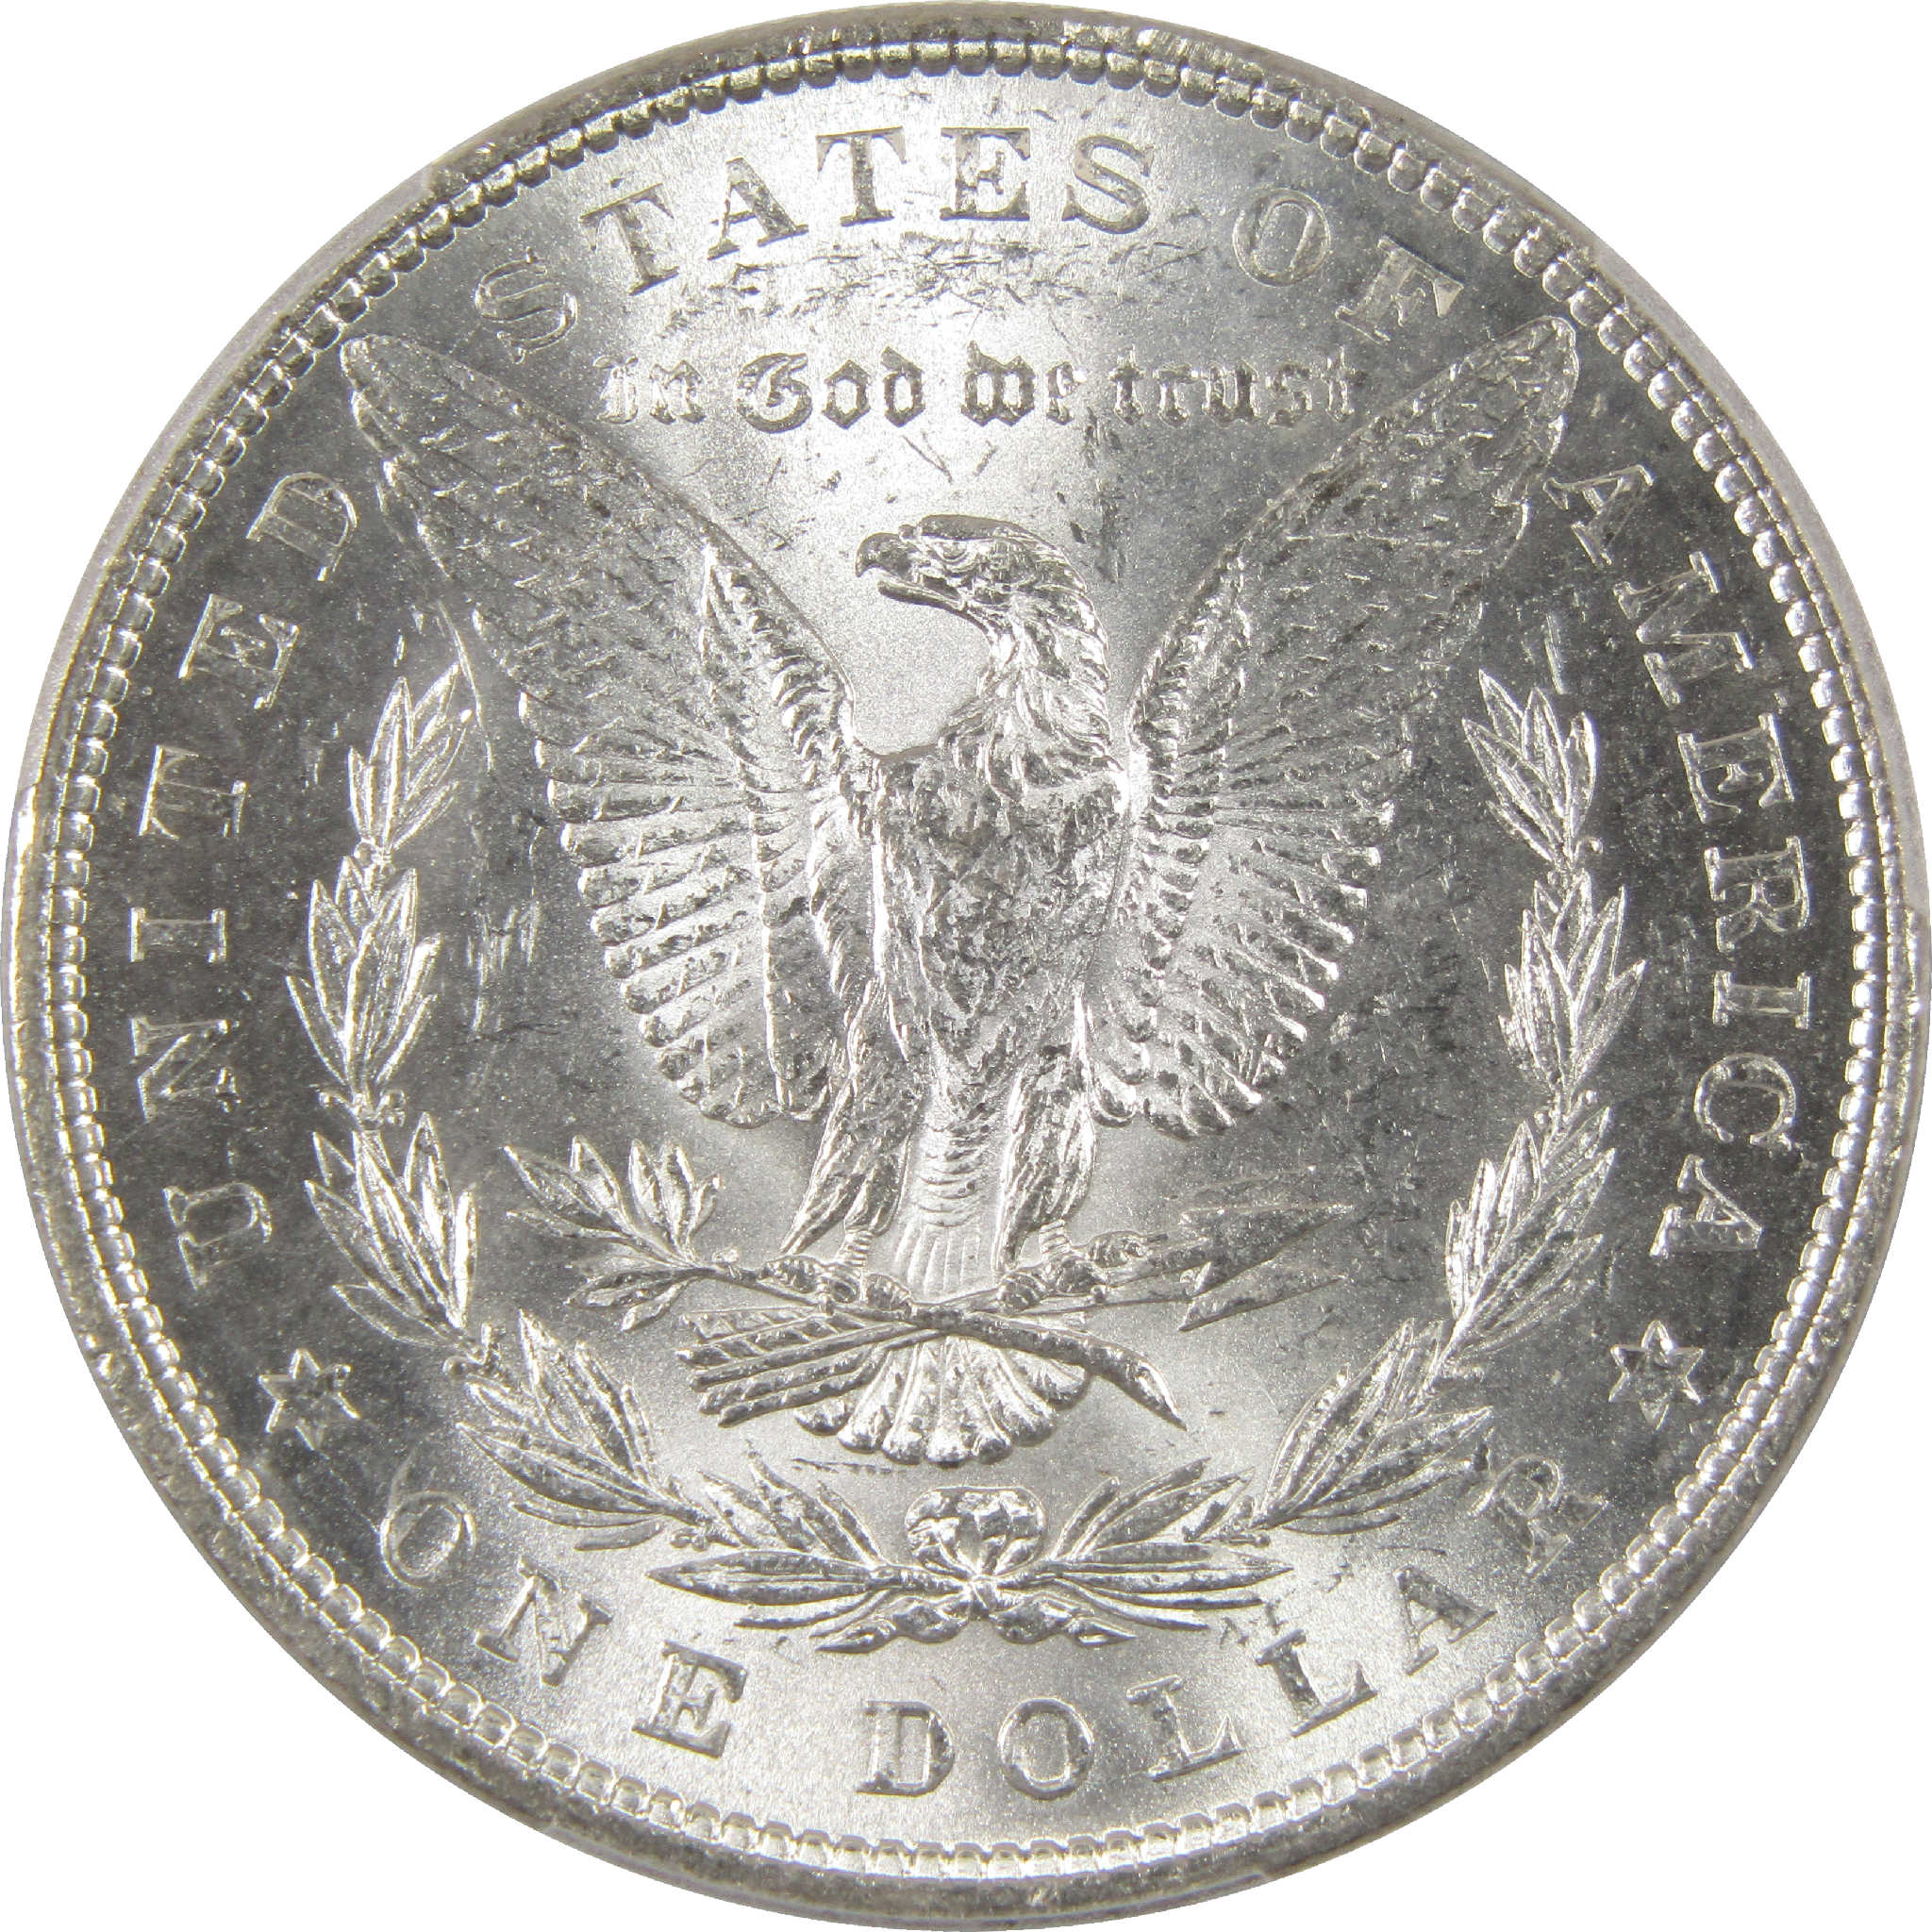 1878 7TF Rev 79 Morgan Dollar MS 62 PCGS Silver $1 Unc SKU:I11312 - Morgan coin - Morgan silver dollar - Morgan silver dollar for sale - Profile Coins &amp; Collectibles